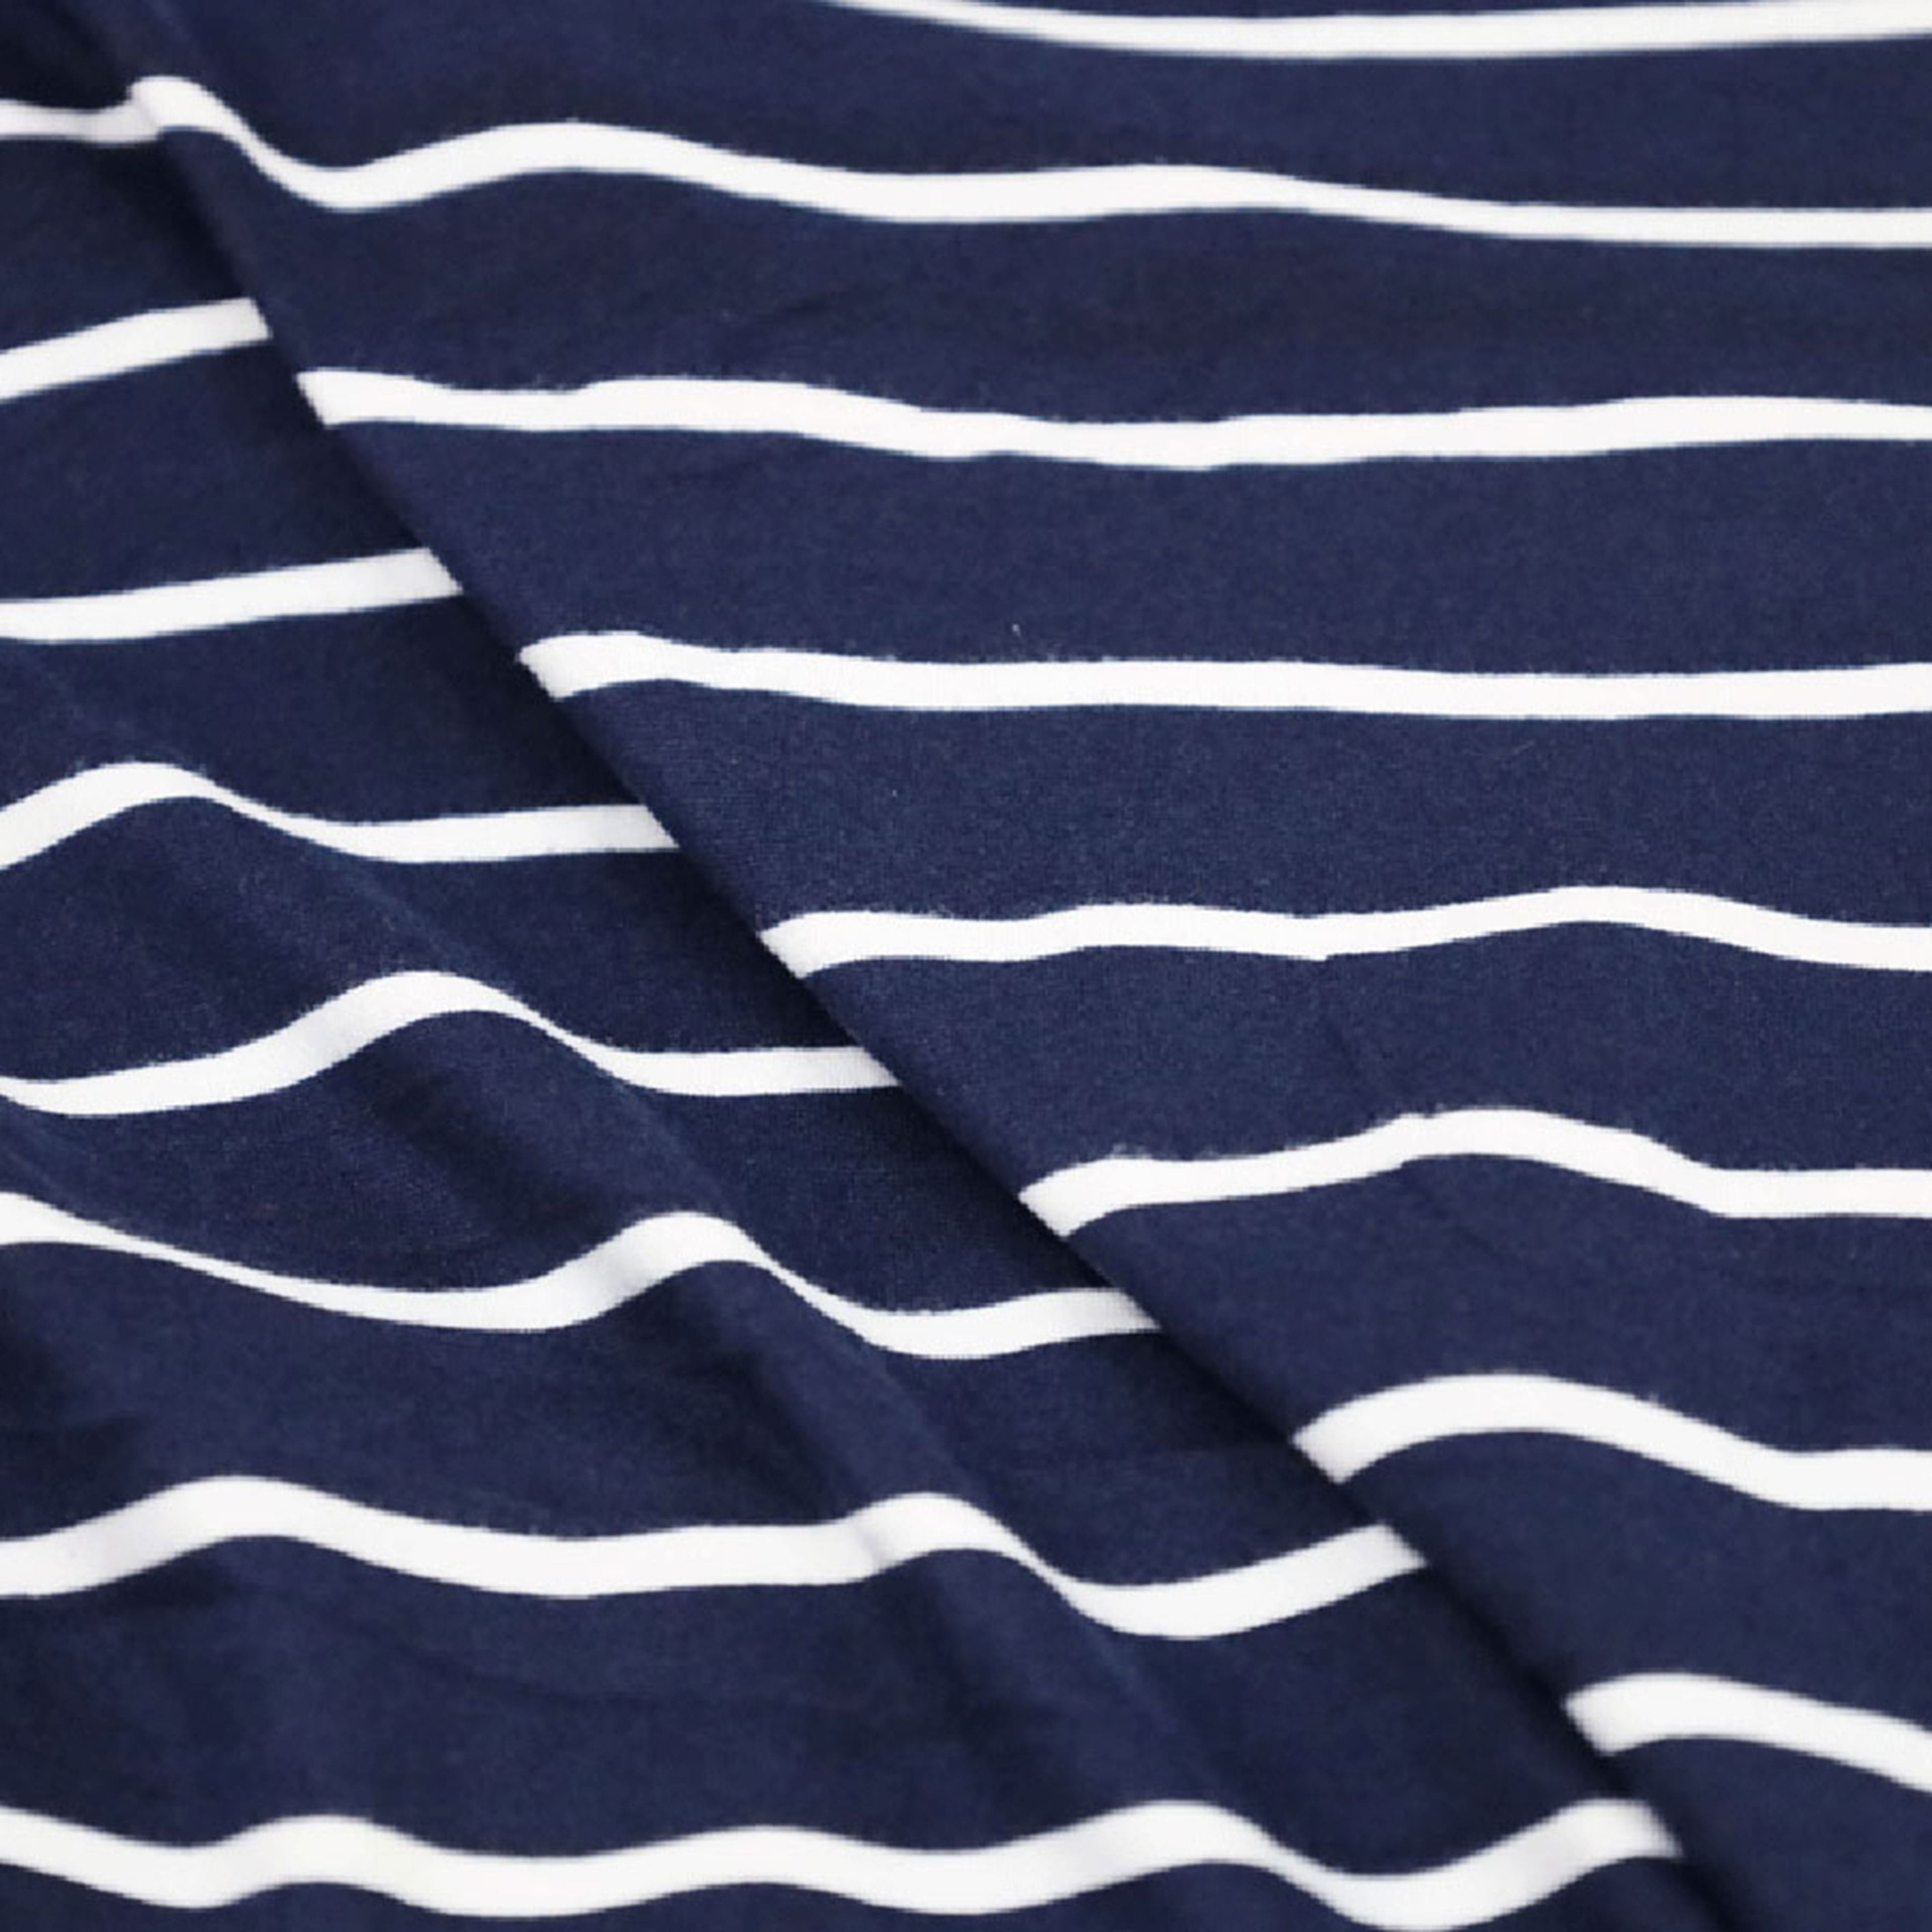 Fabric Merchants White Stripes on Navy Double Brushed 4-Way Stretch Fabric